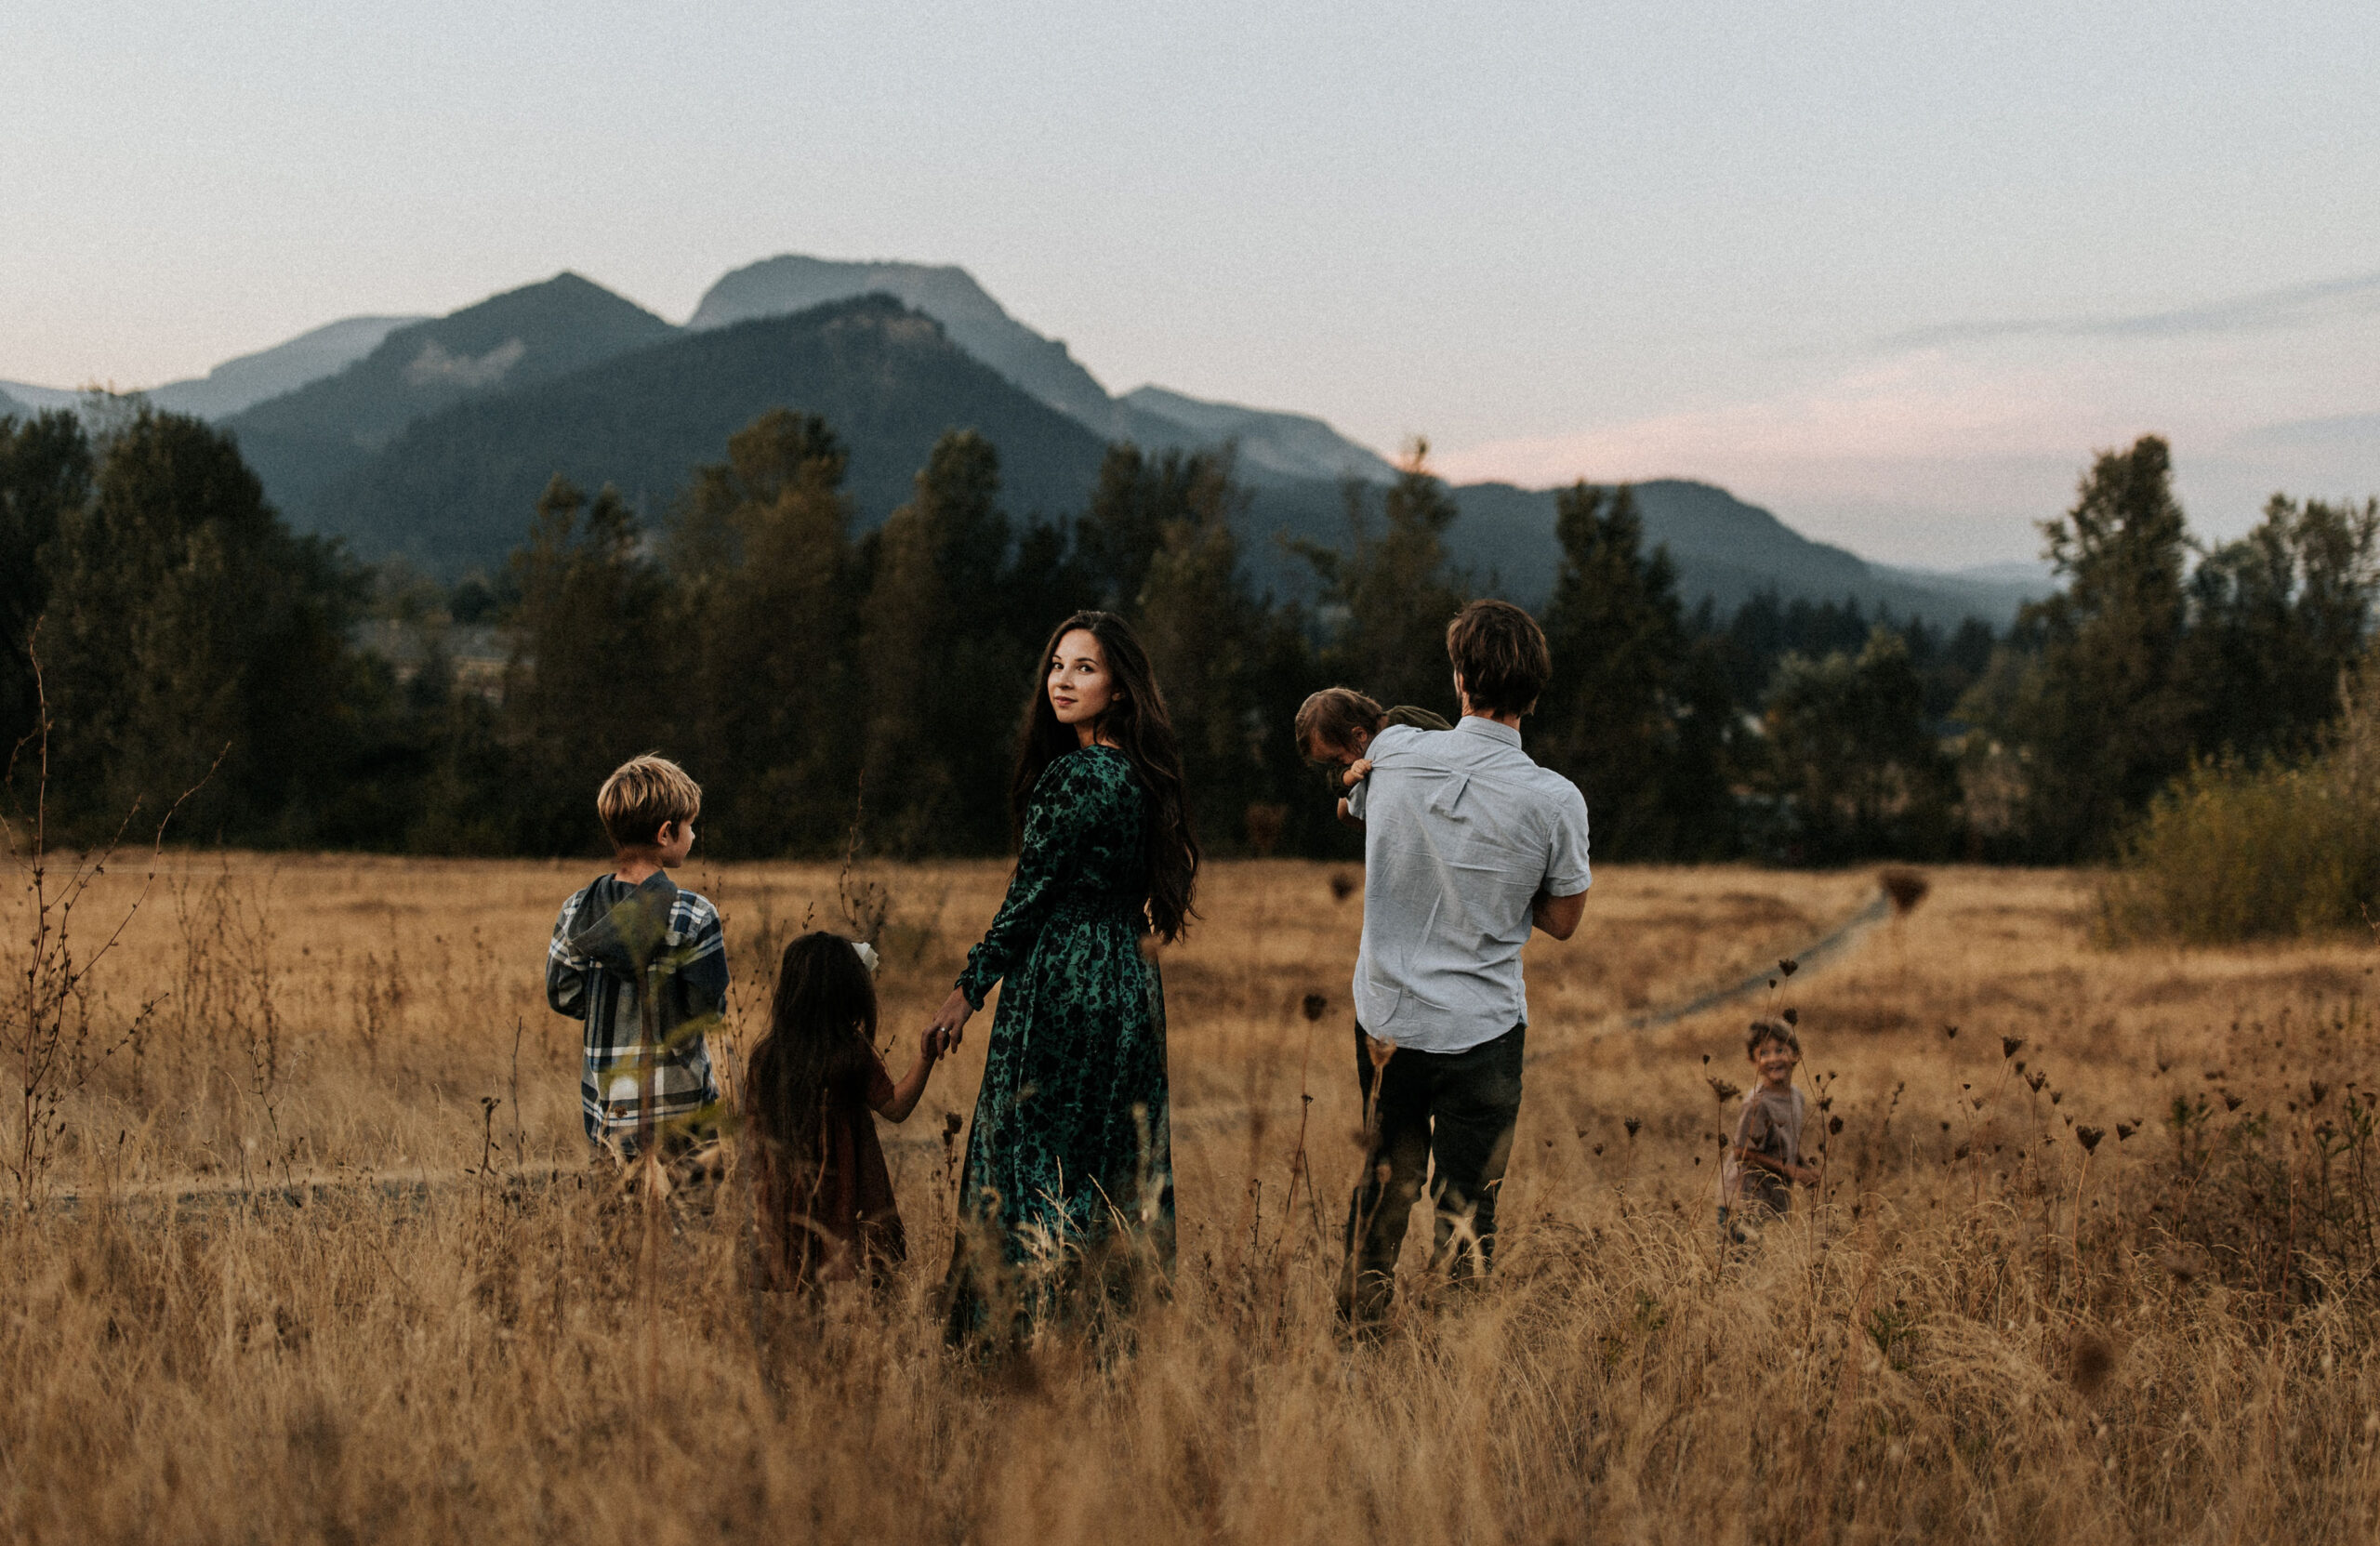 A family walks through a field with mountains in the background in Portland Oregon.